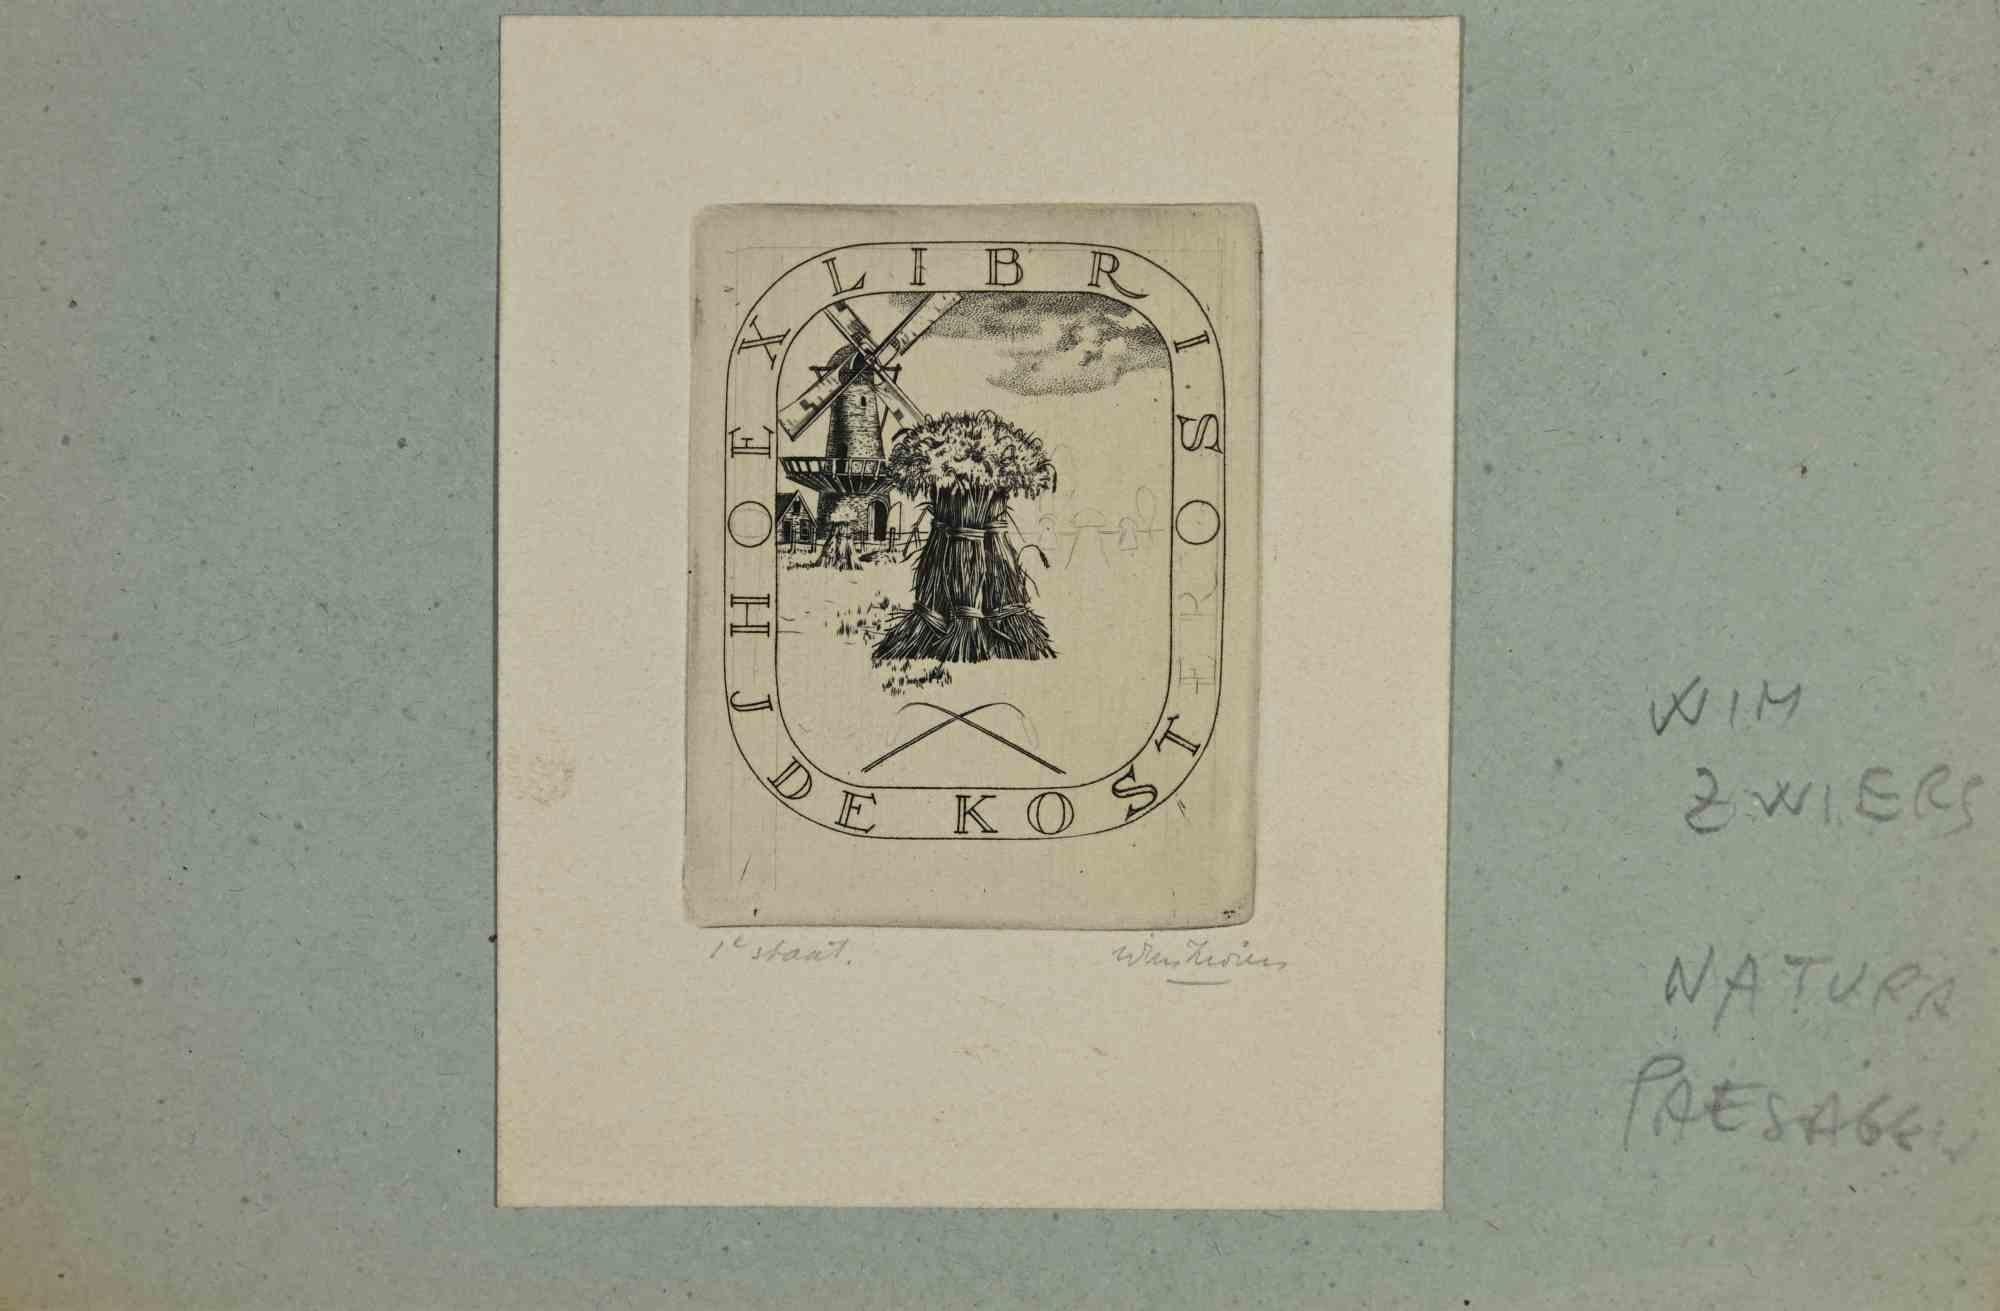 Ex-Libris  - H J De Kost is an Artwork realized in 1946 by the artist Wim Zwiers. 

Etching print on ivory paper. Hand signed on the right margin and dated on the back. 

The work is glued on colored cardboard. Total dimensions: 13 x 20 cm.

Good